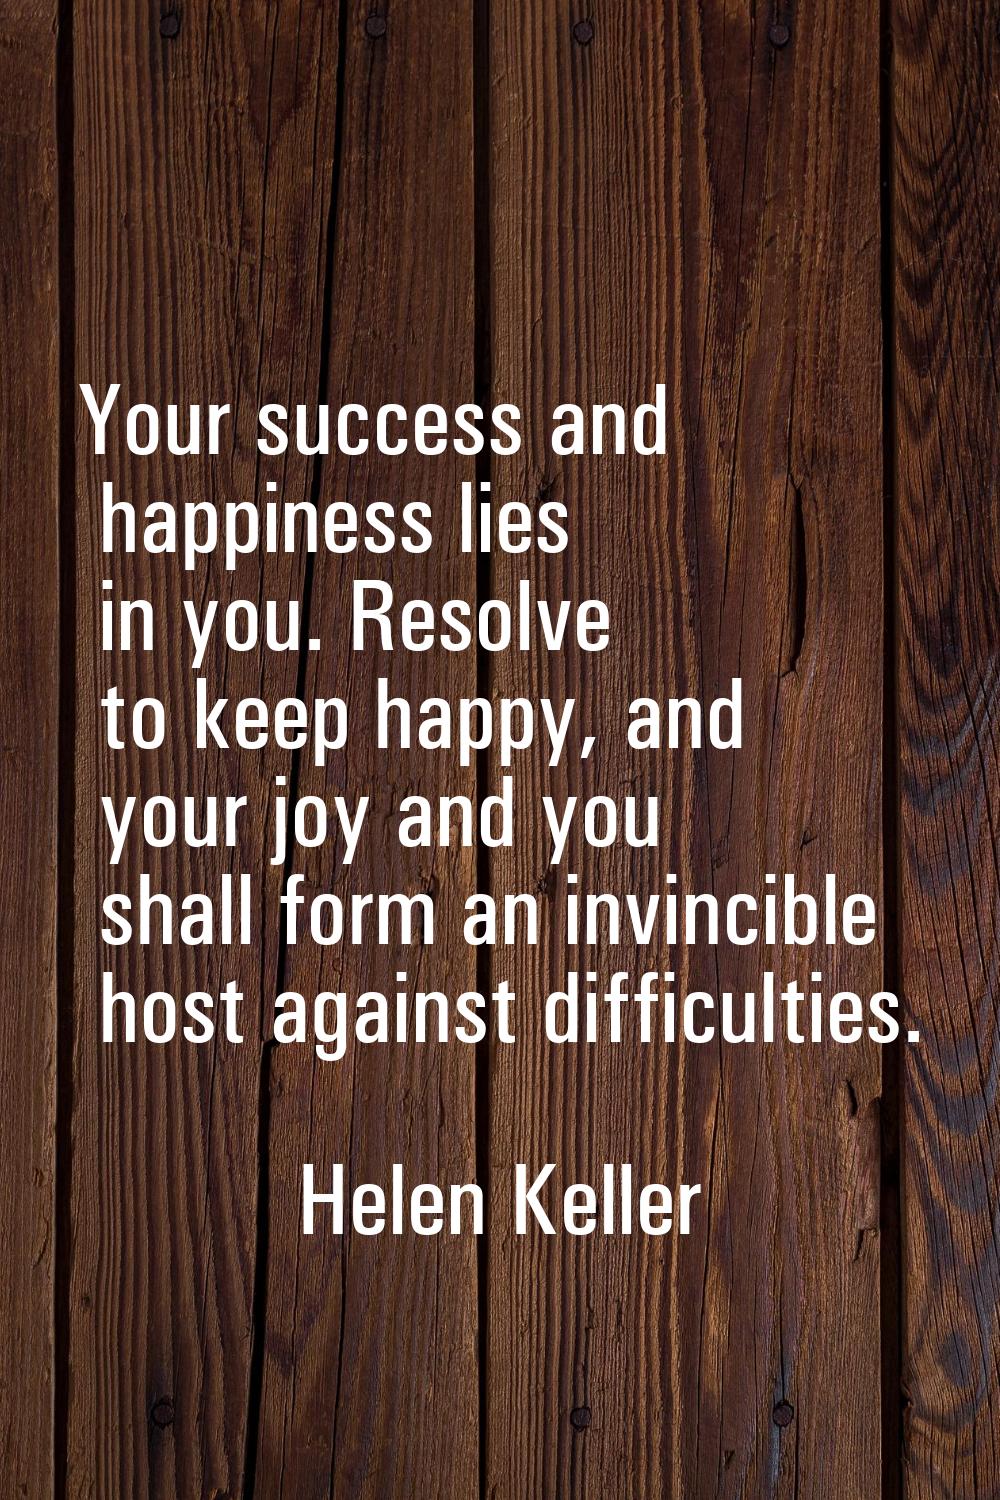 Your success and happiness lies in you. Resolve to keep happy, and your joy and you shall form an i